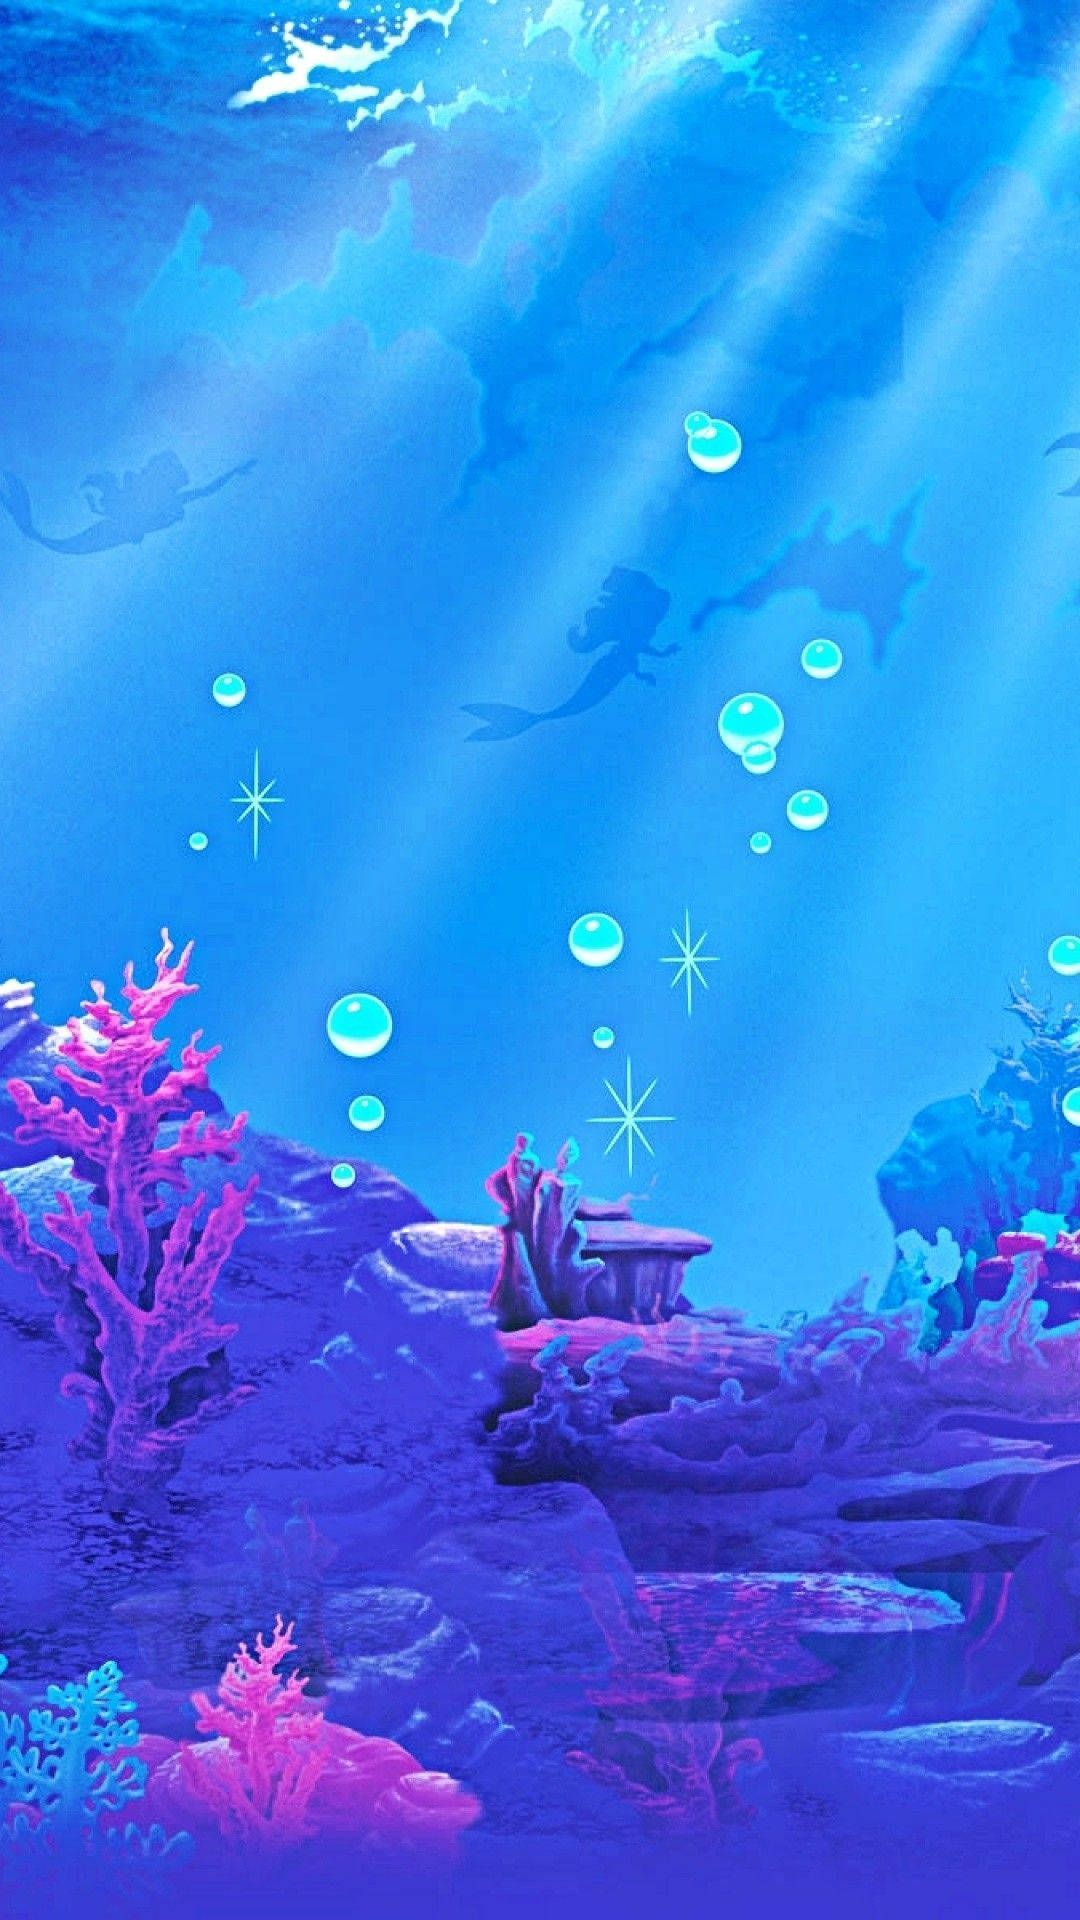 The underwater scene with fish and sea creatures - Mermaid